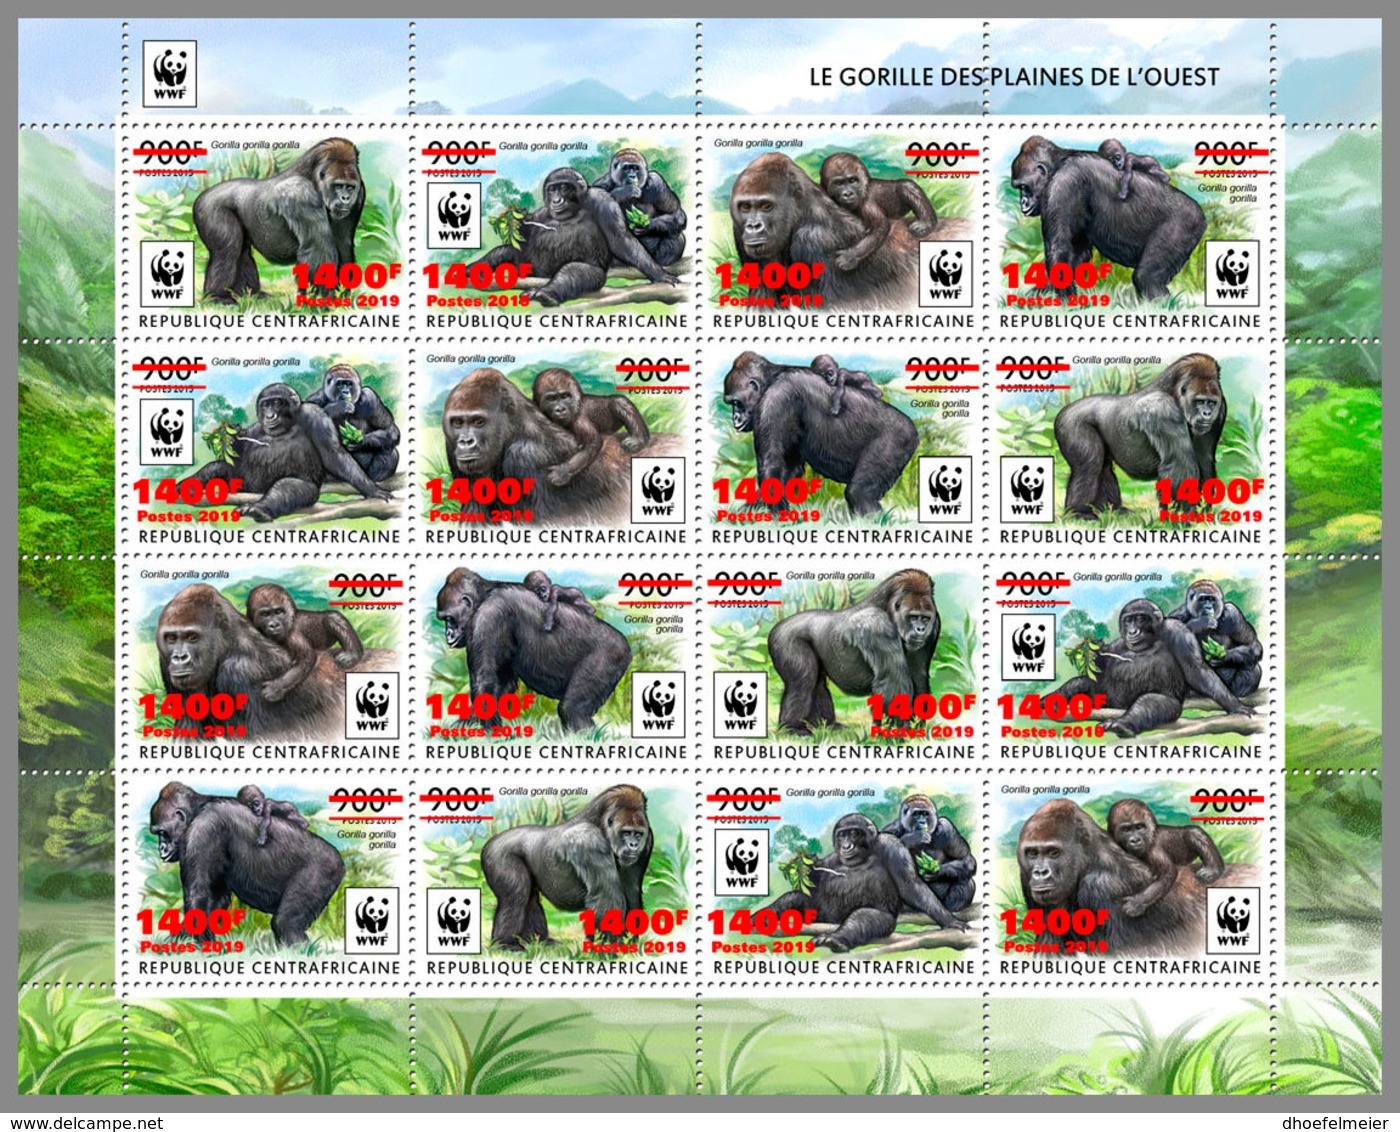 CENTRALAFRICA 2019 MNH WWF Overprint Gorillas RED FOIL M/S II - OFFICIAL ISSUE - DH1935 - Gorilles